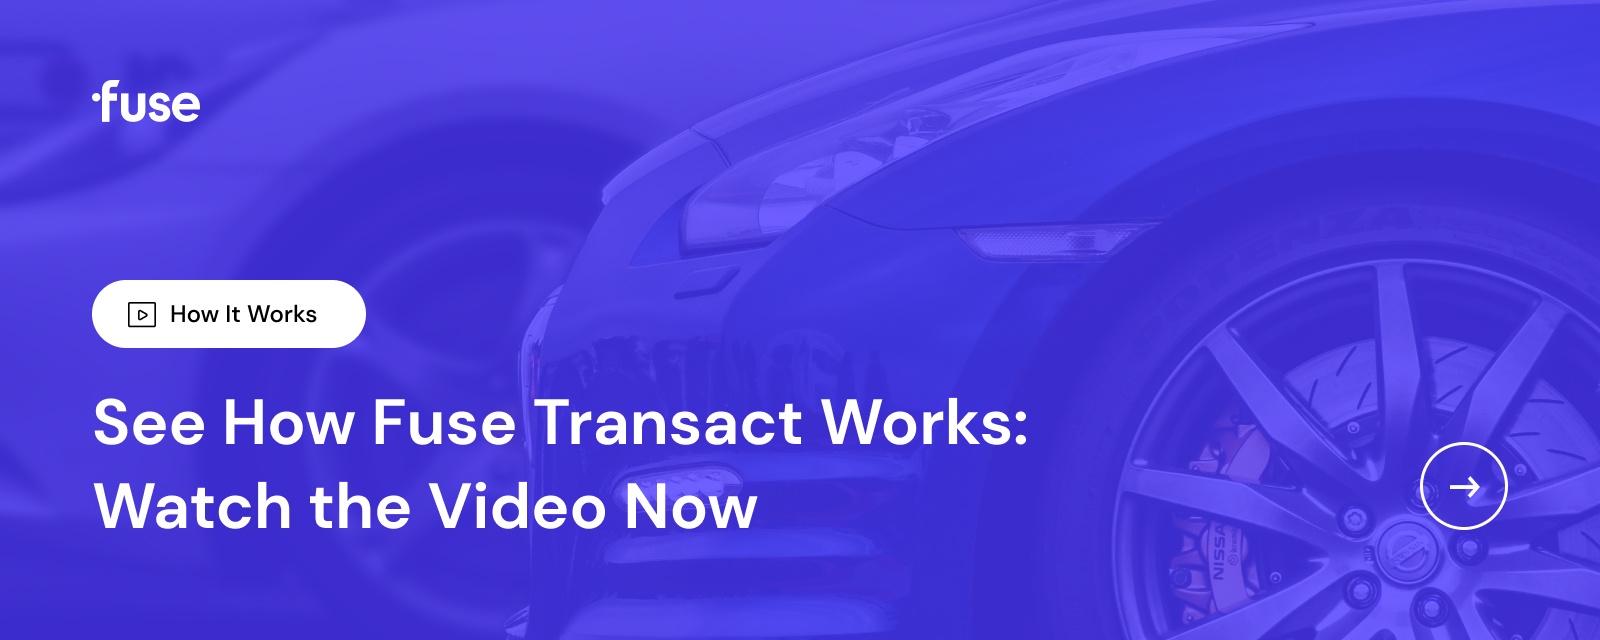 See How Fuse Transact Works: Watch the Video Now